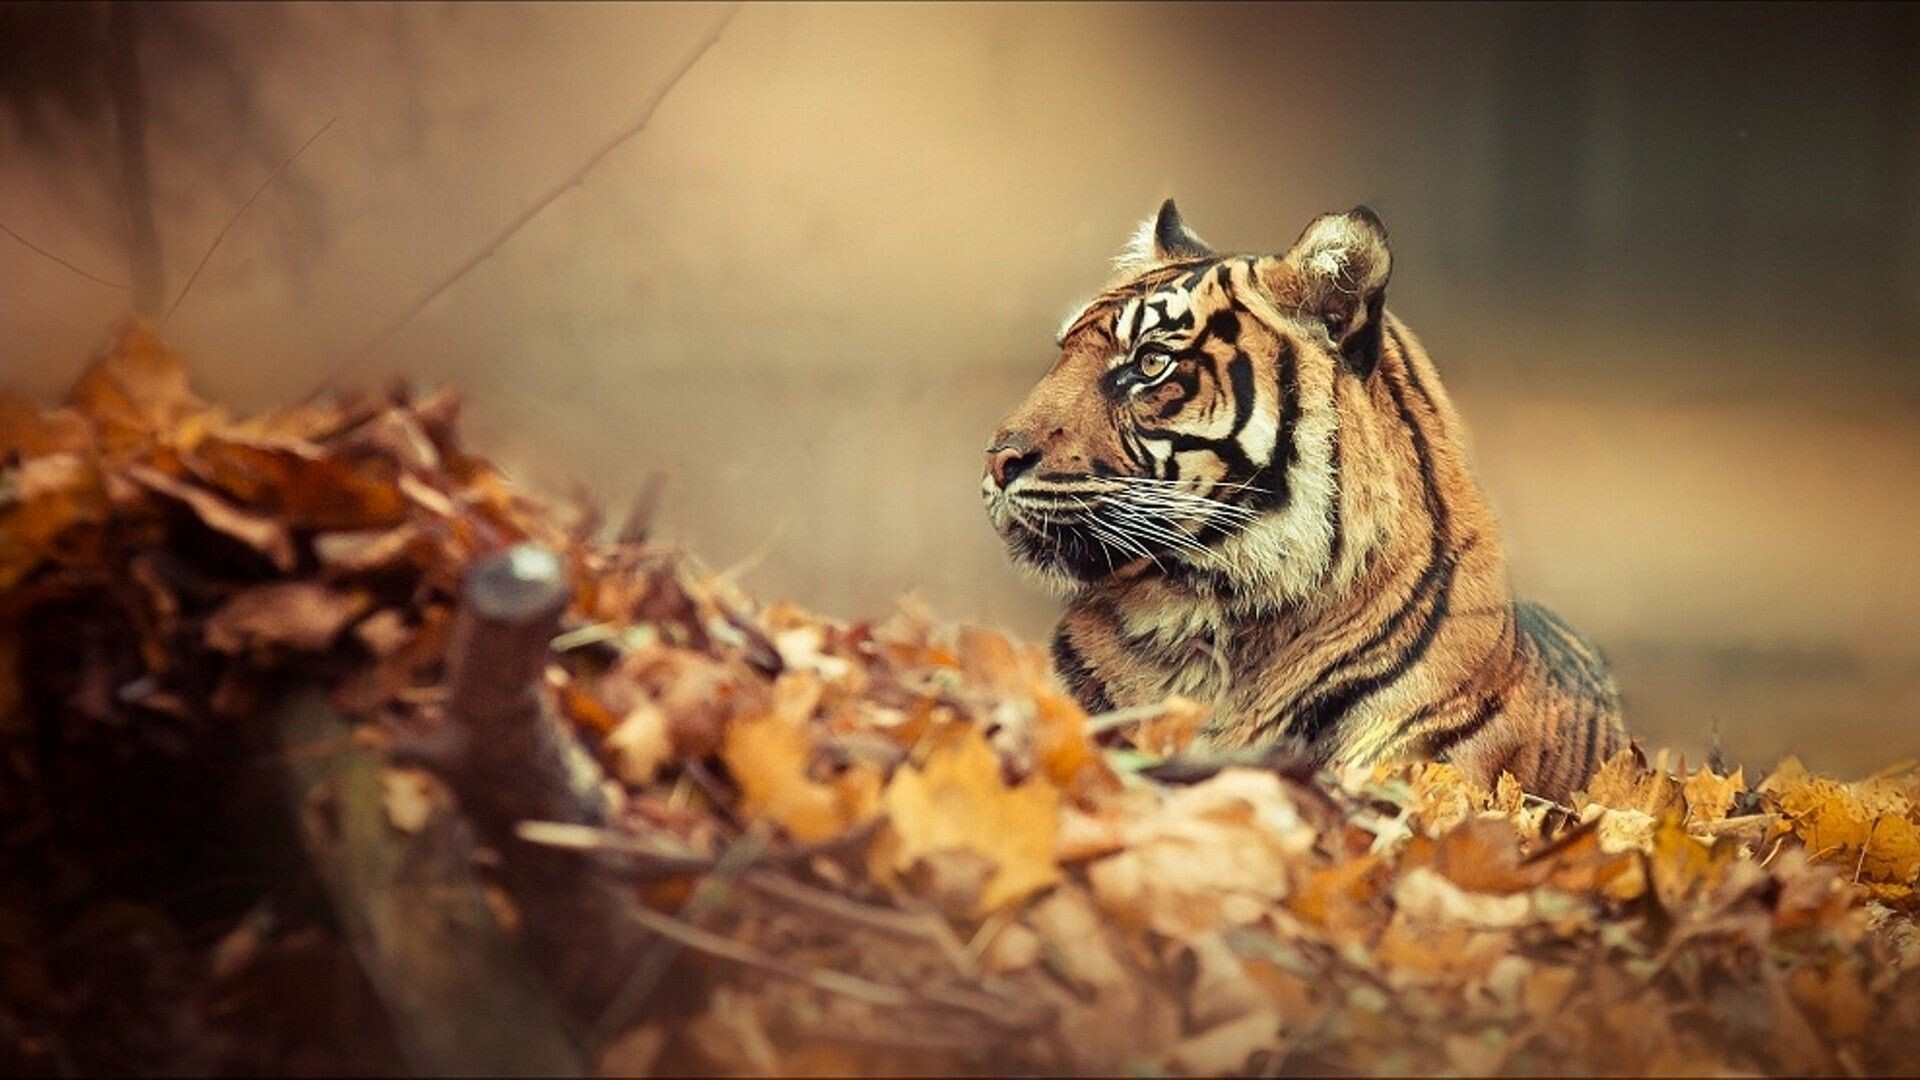 Tiger: A large wild animal of the cat family with yellowish-orange fur with black lines that live in parts of Asia. 1920x1080 Full HD Wallpaper.